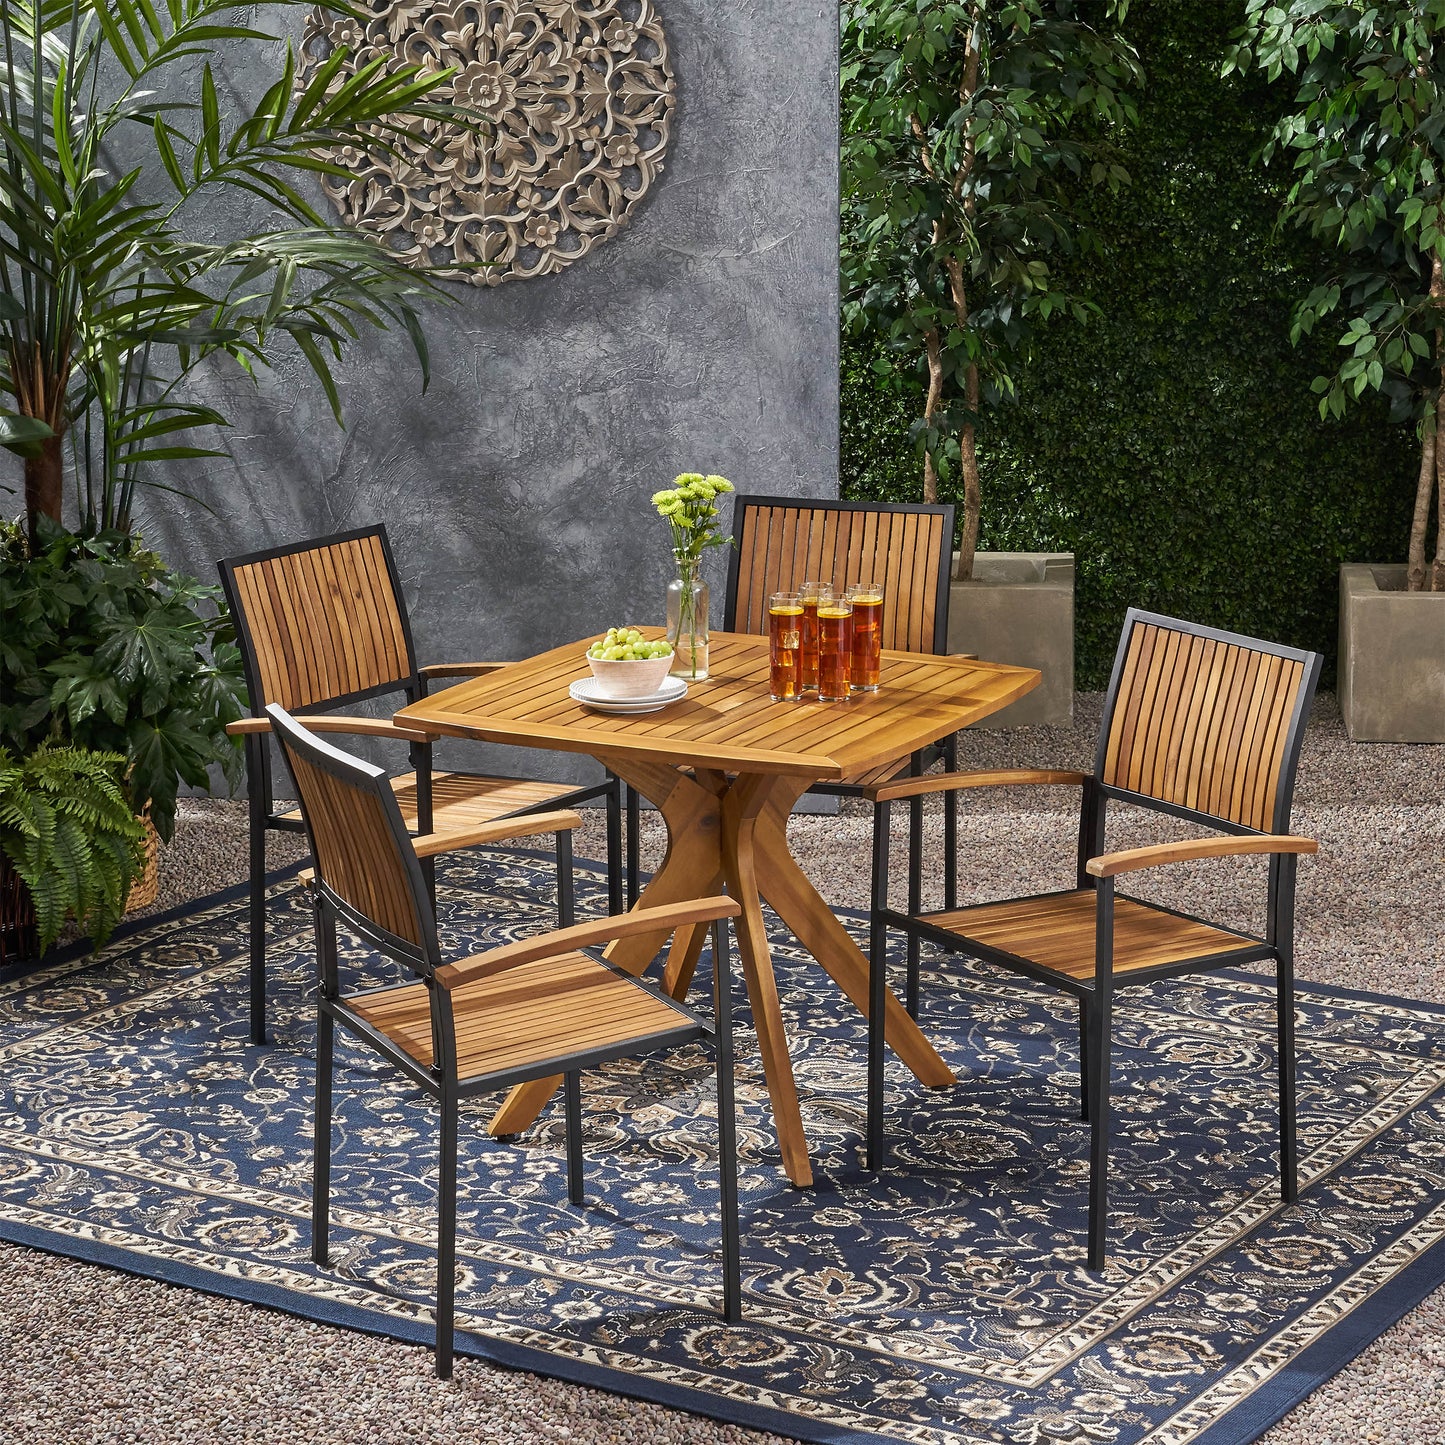 Emma Outdoor 4 Seater Acacia Wood Square Dining Set